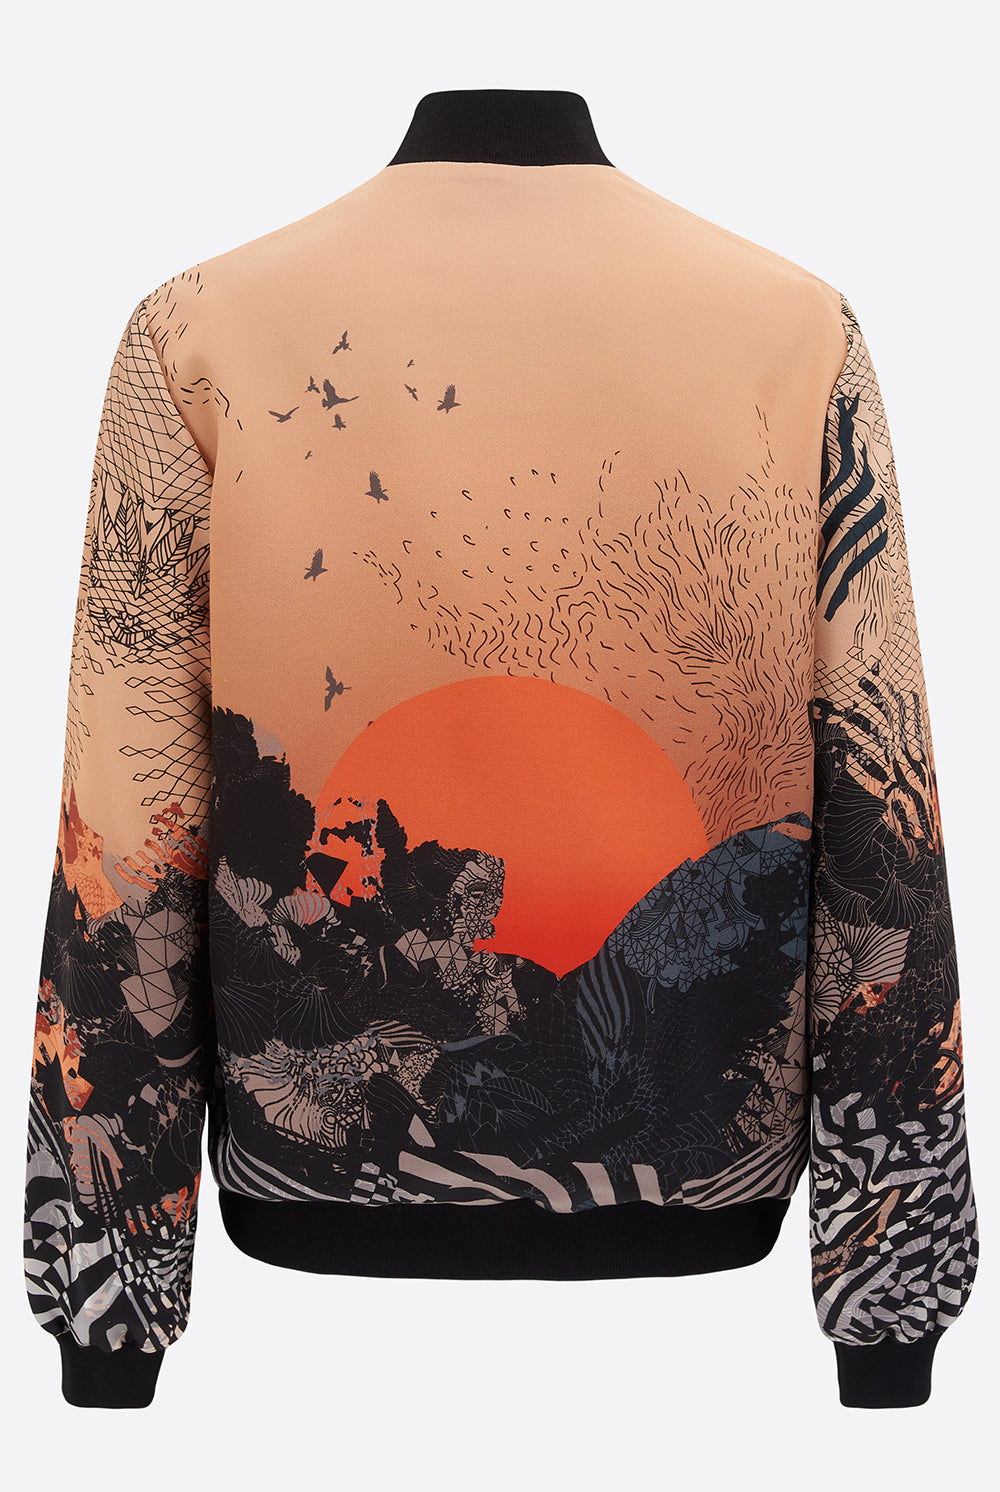 Back of a silk bomber jacket with sunrise design in oranges and blacks